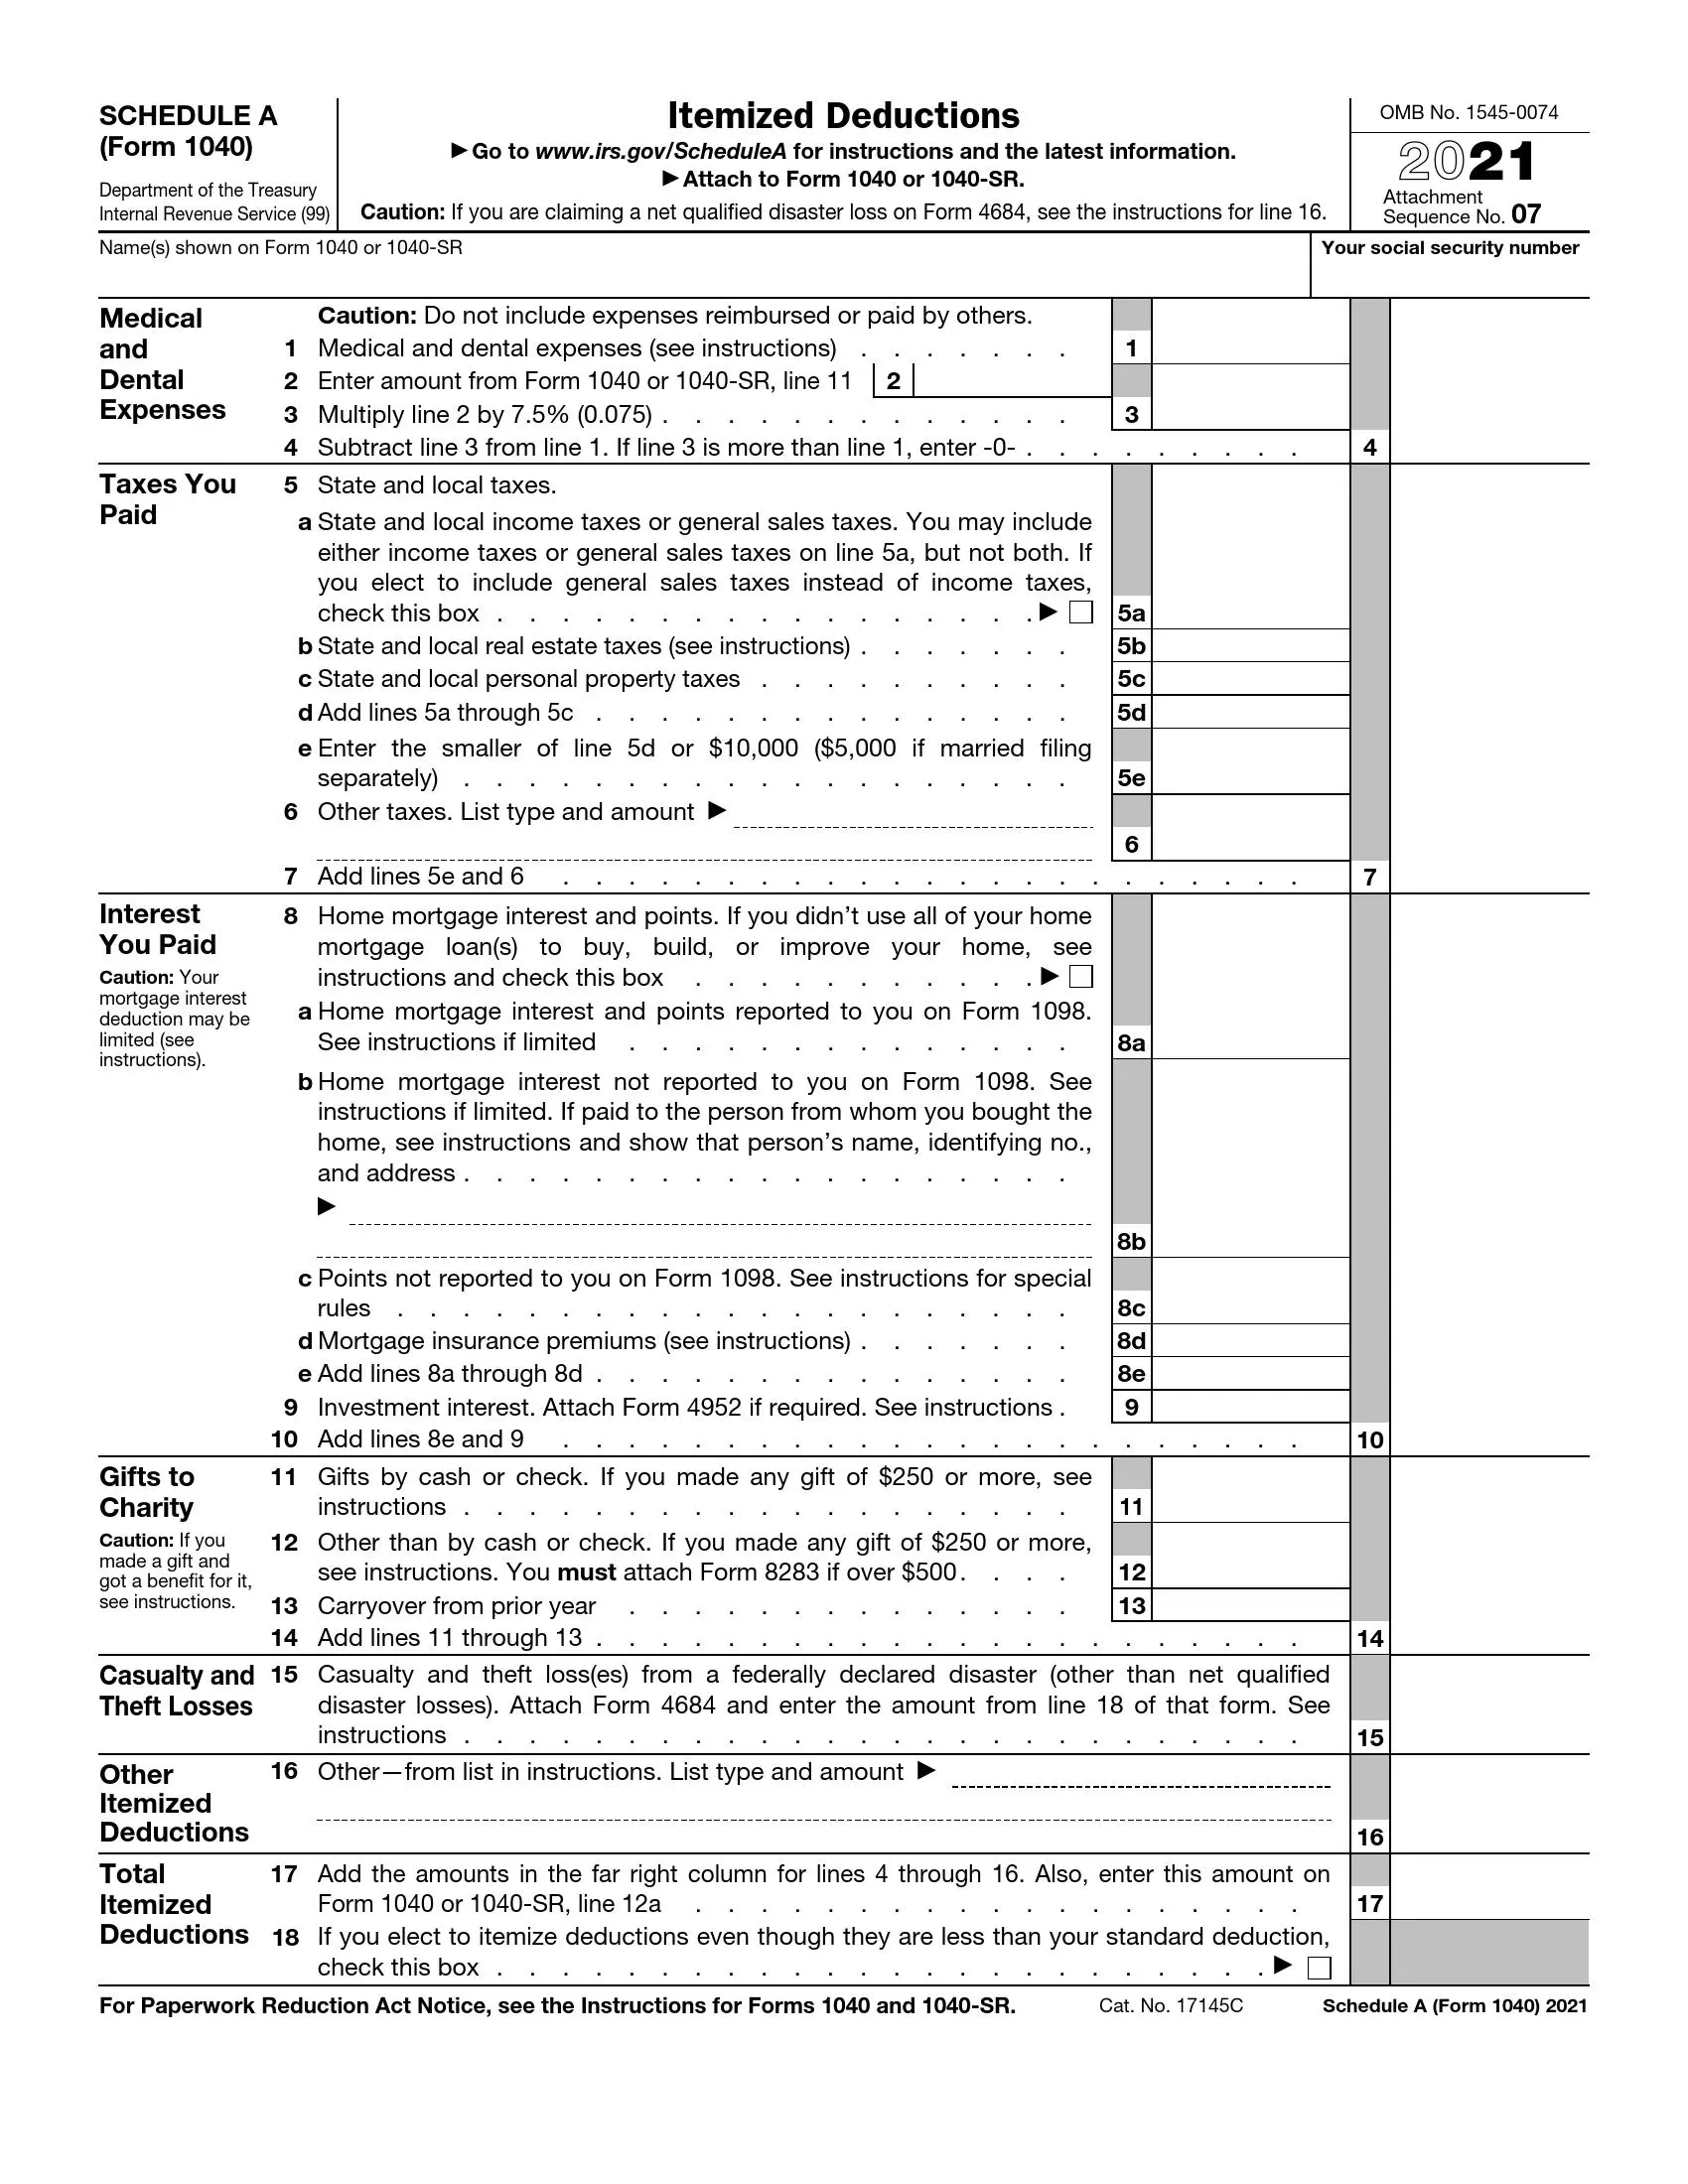 irs schedule a form 1040 or 1040-sr 2021 preview